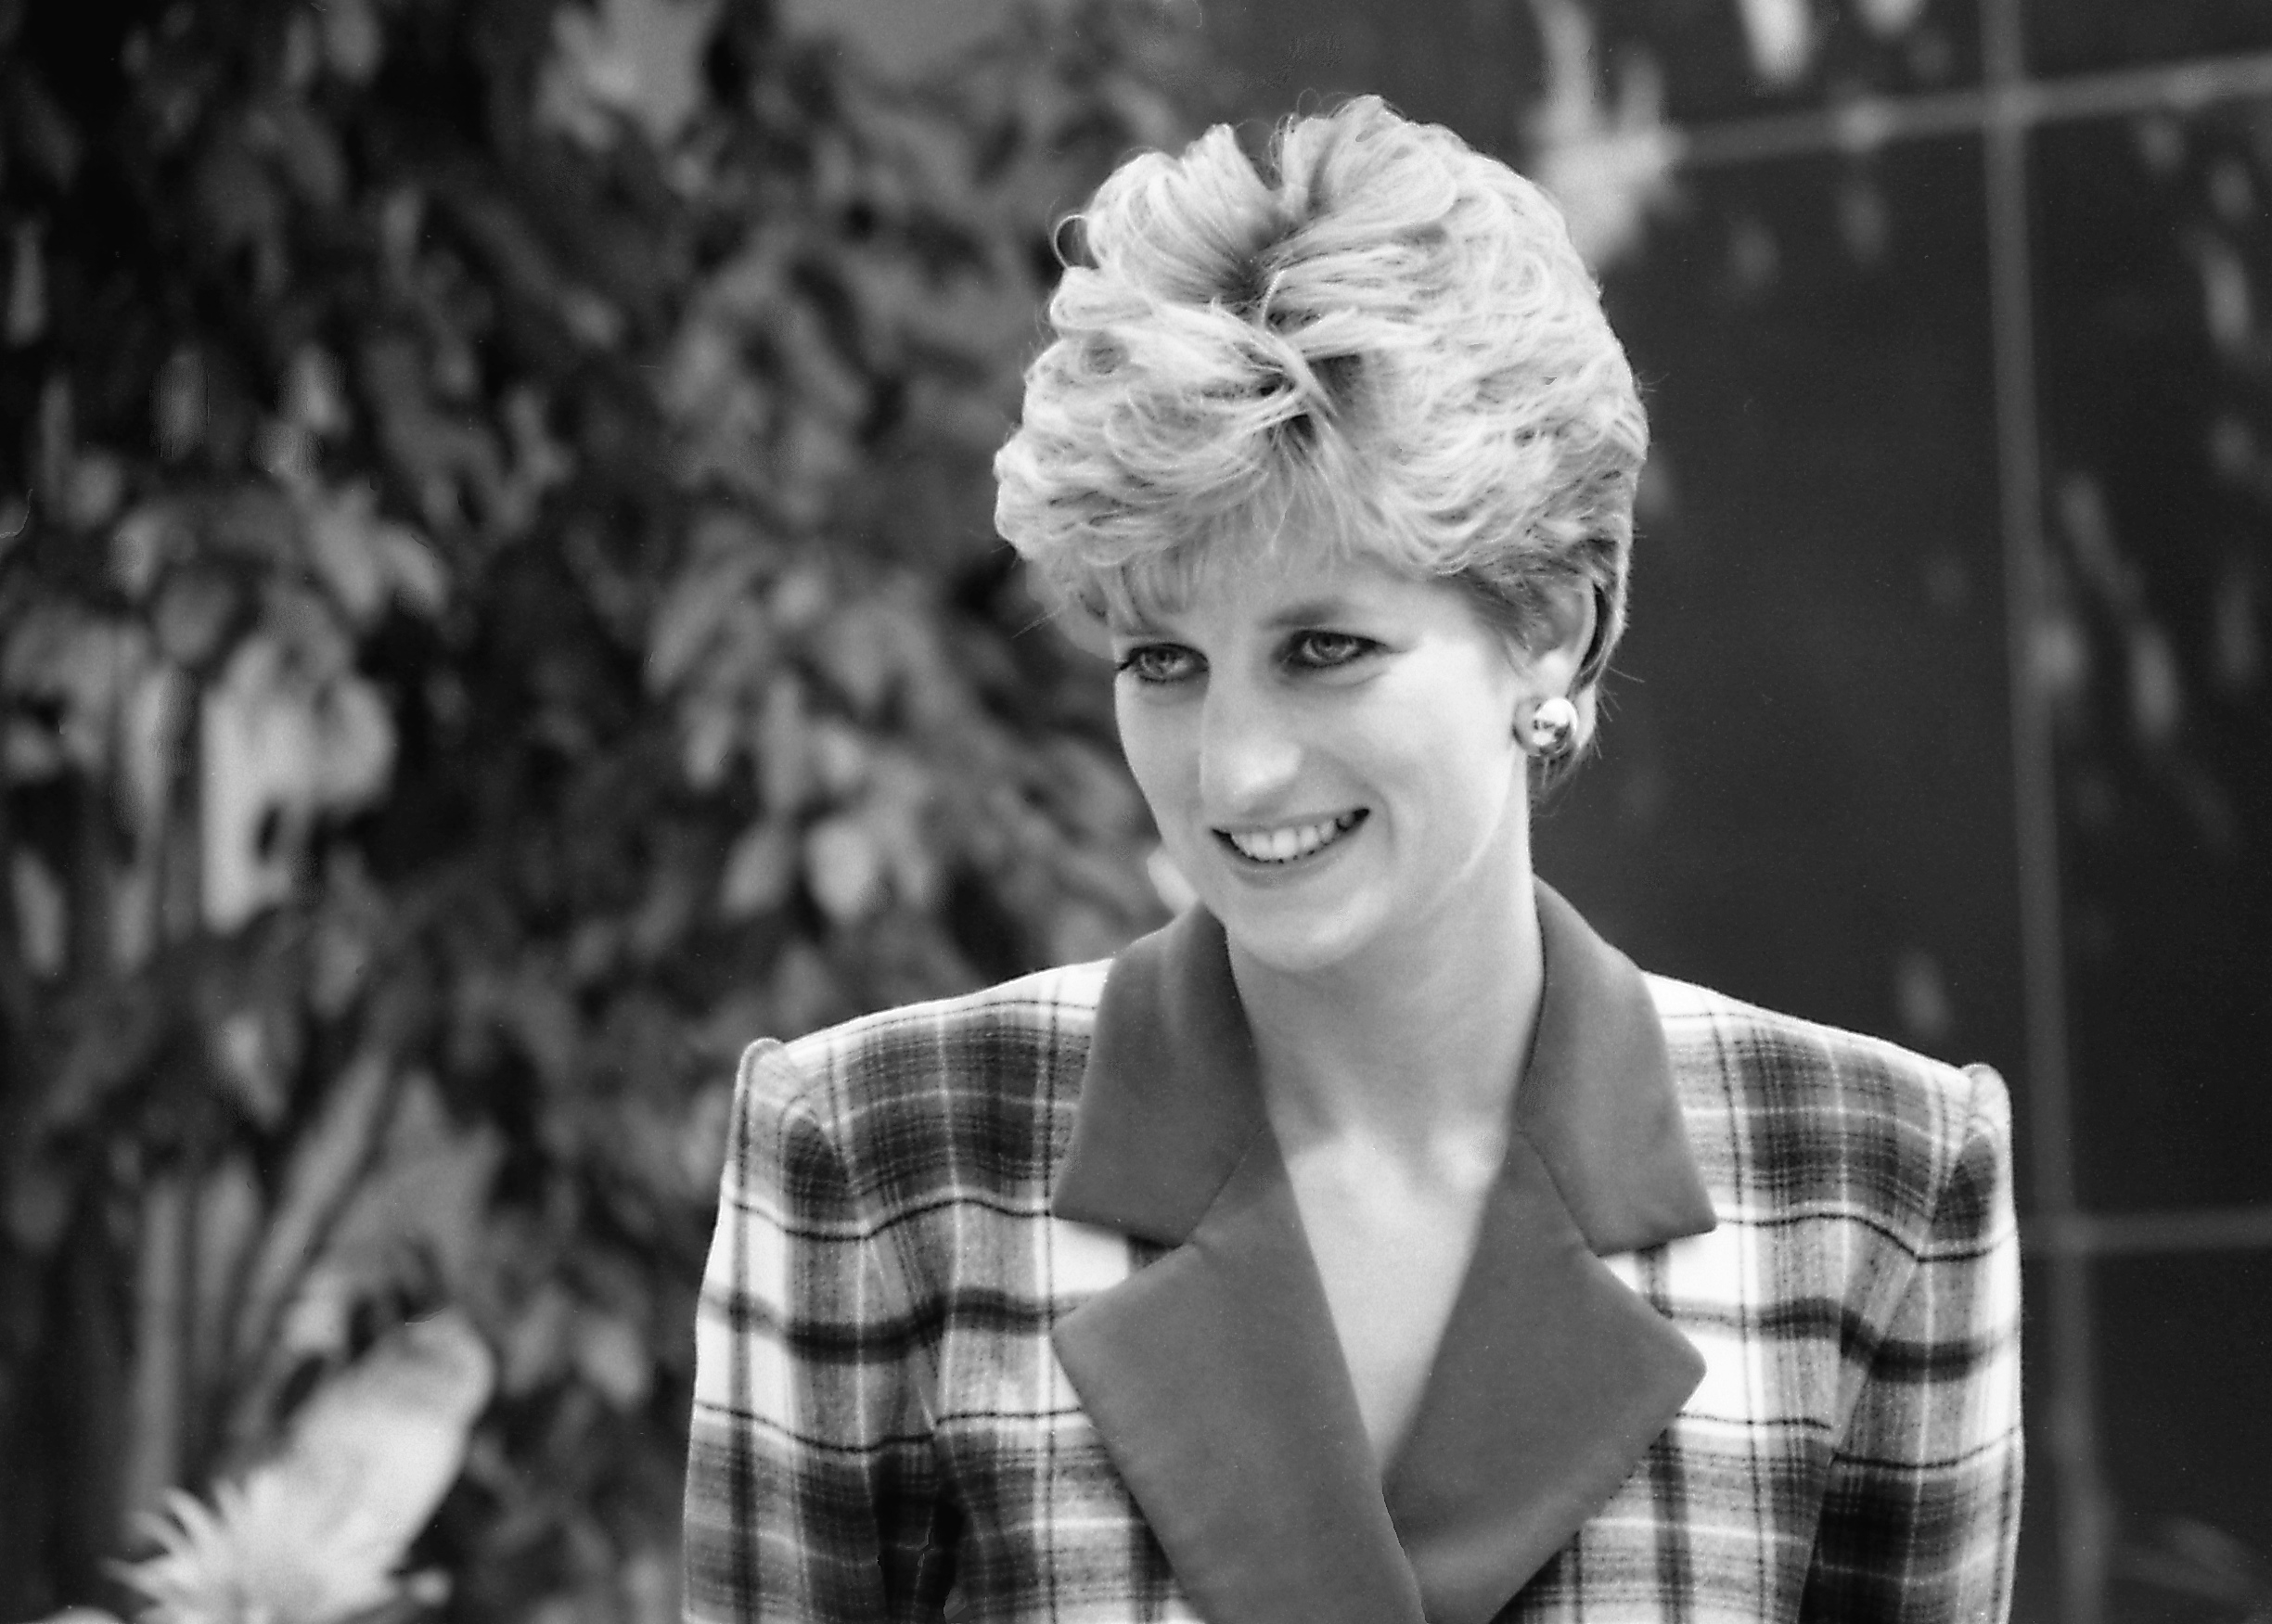 5 lessons in humanity from Princess Diana